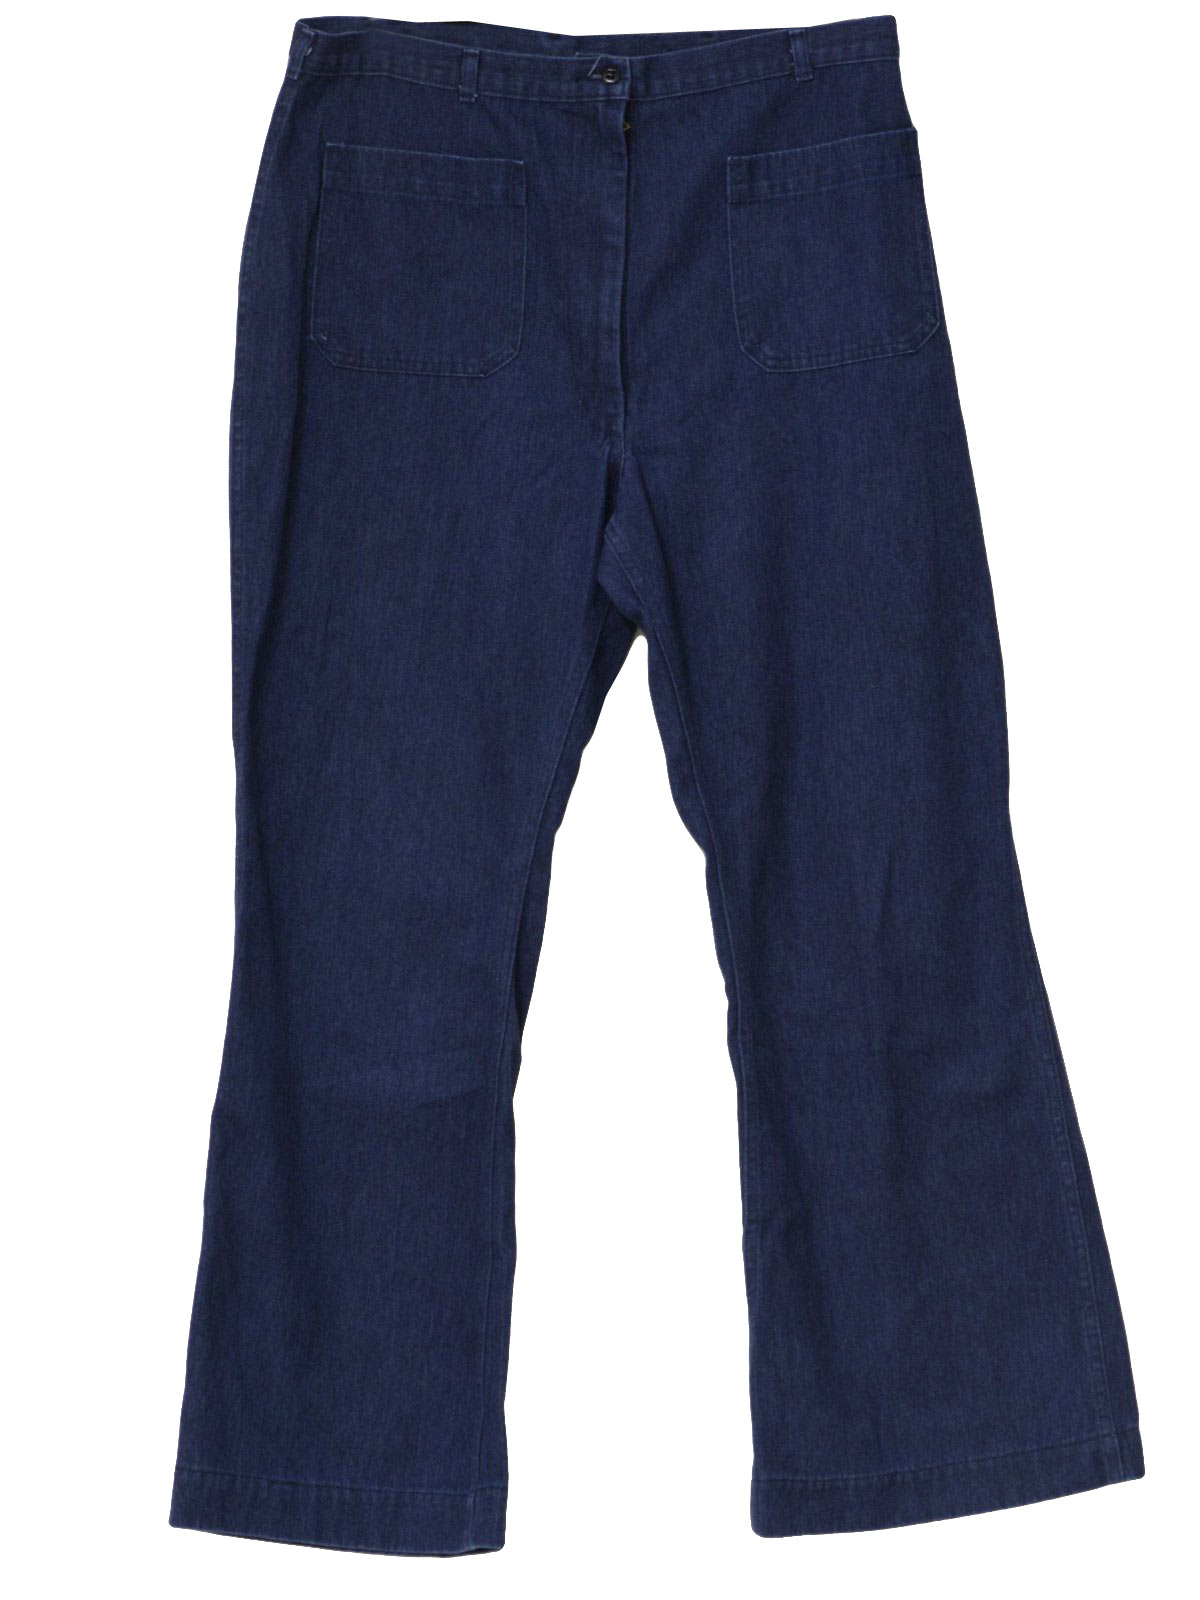 1970's Retro Bellbottom Pants: 70s -Goodwill Industries- Womens blue ...